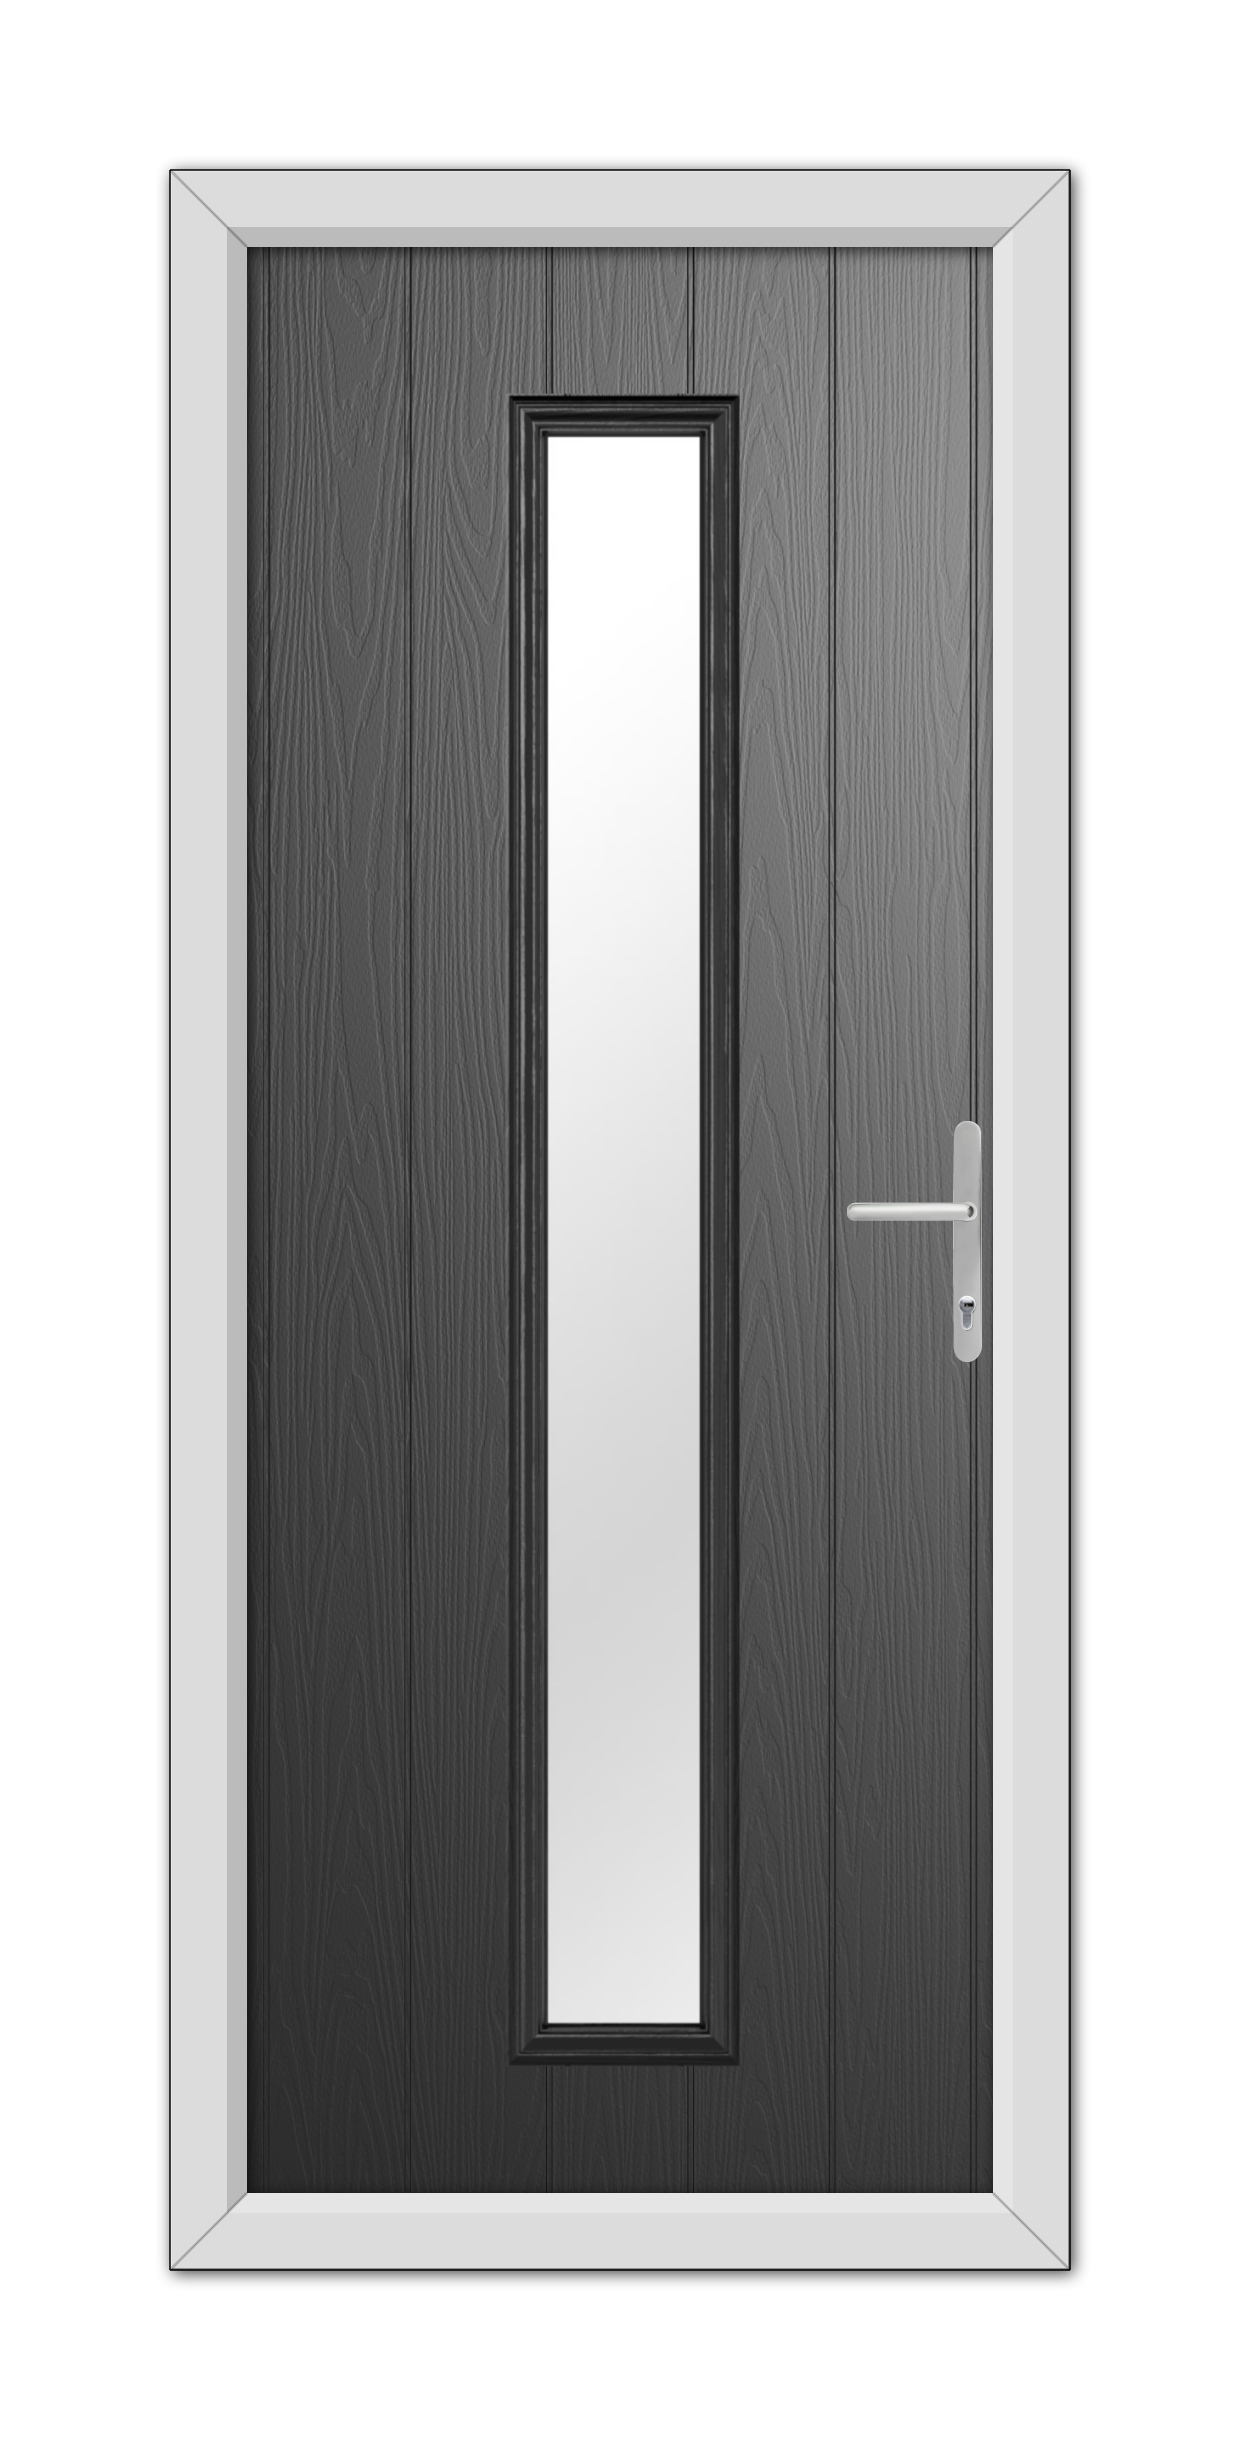 A modern Black Rutland Composite Door 48mm Timber Core with a vertical glass panel and a silver handle, set within a white door frame.